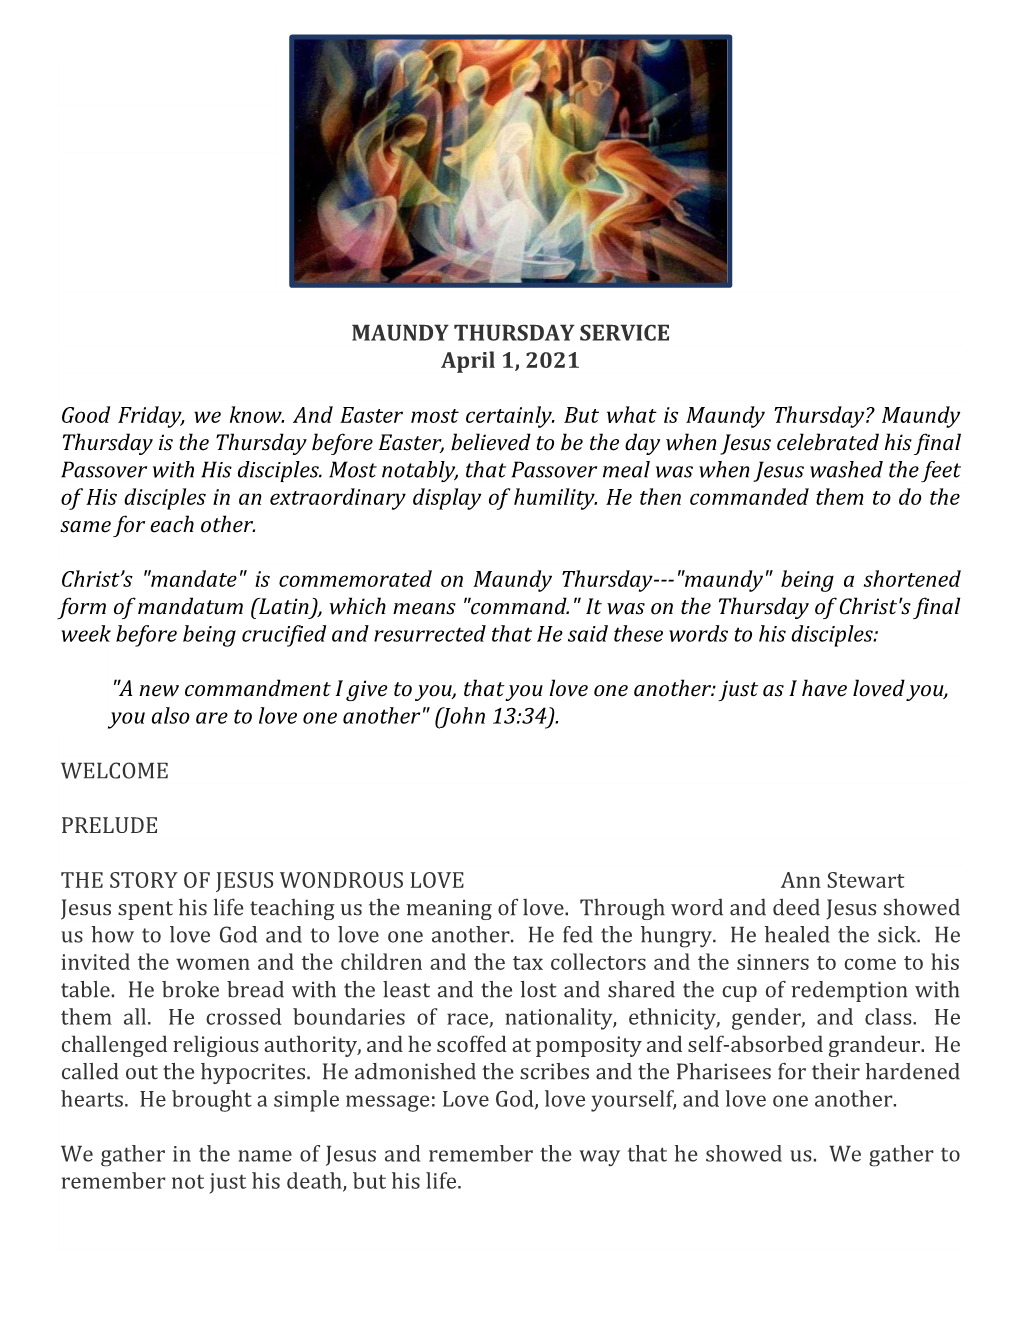 MAUNDY THURSDAY SERVICE April 1, 2021 Good Friday, We Know. and Easter Most Certainly. but What Is Maundy Thursday? Maundy Thurs